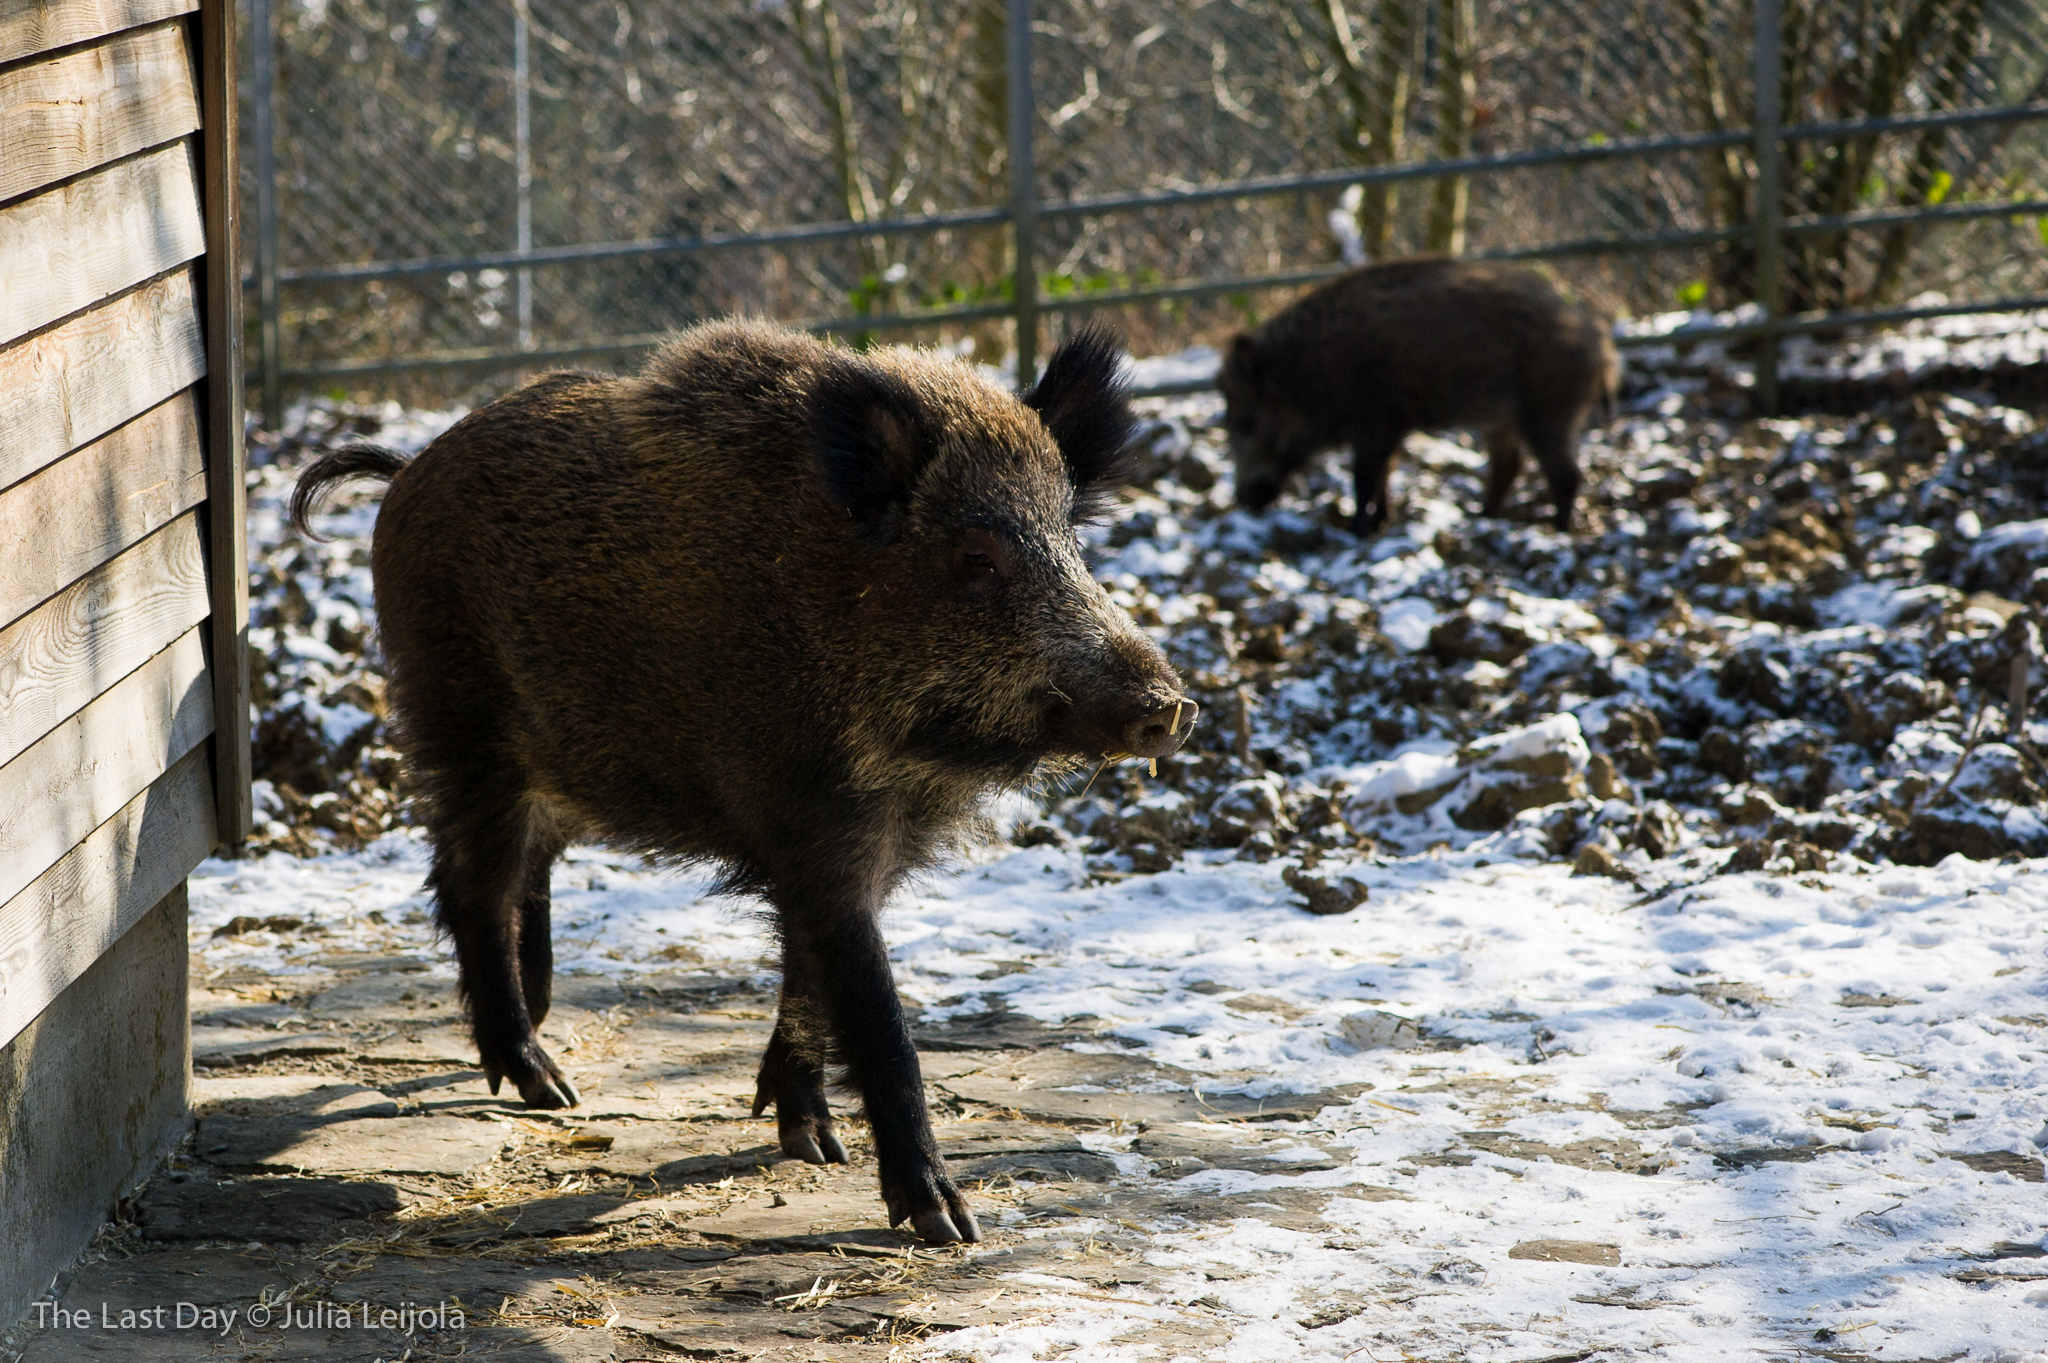 A Sus scrofa is coming towards the camera from behind a wooden wall.